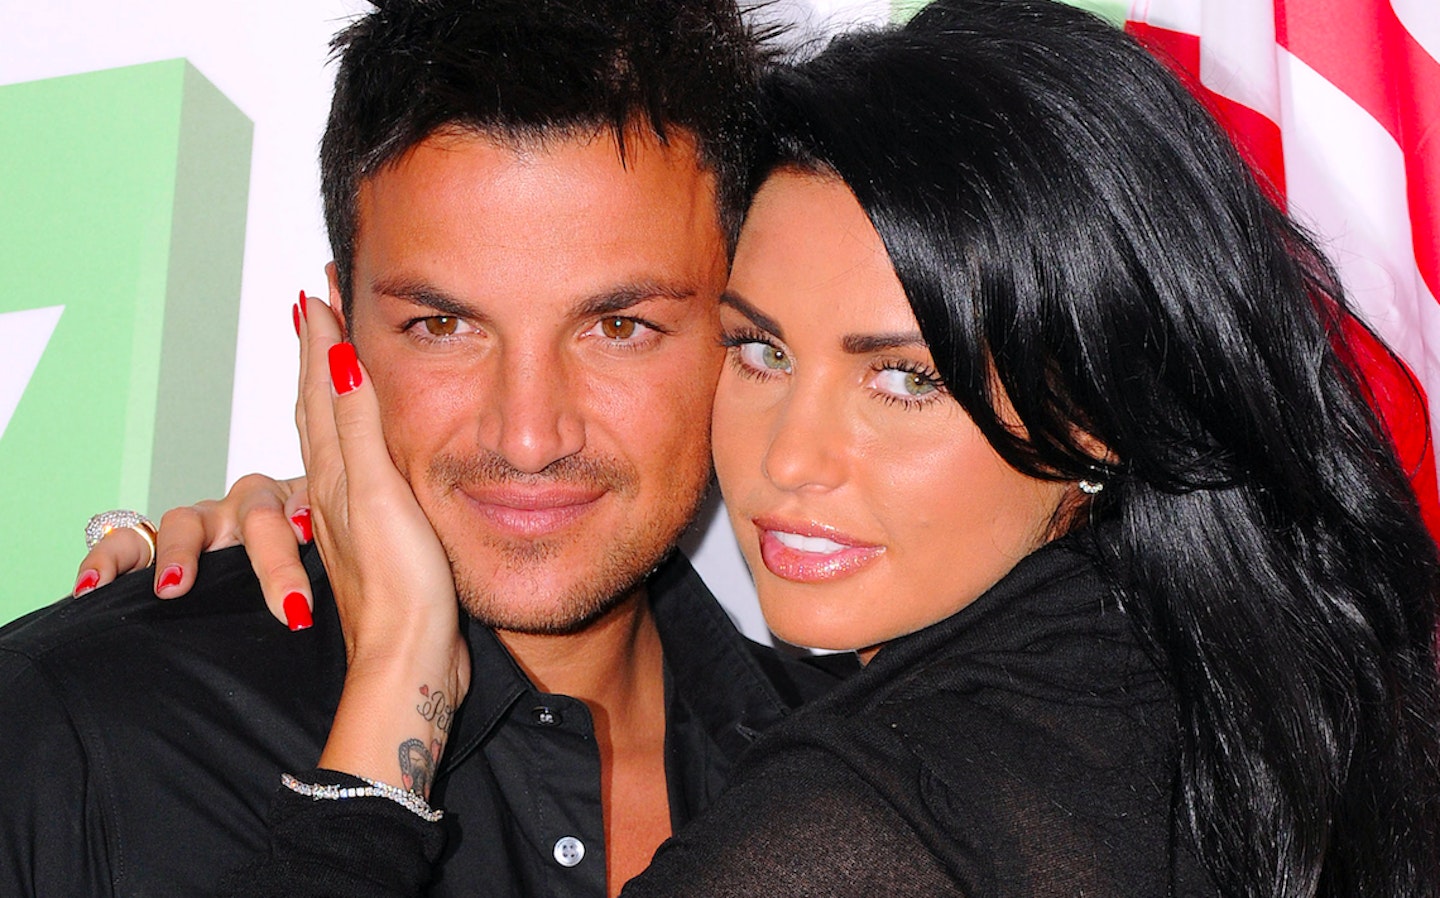 katie price and peter andre